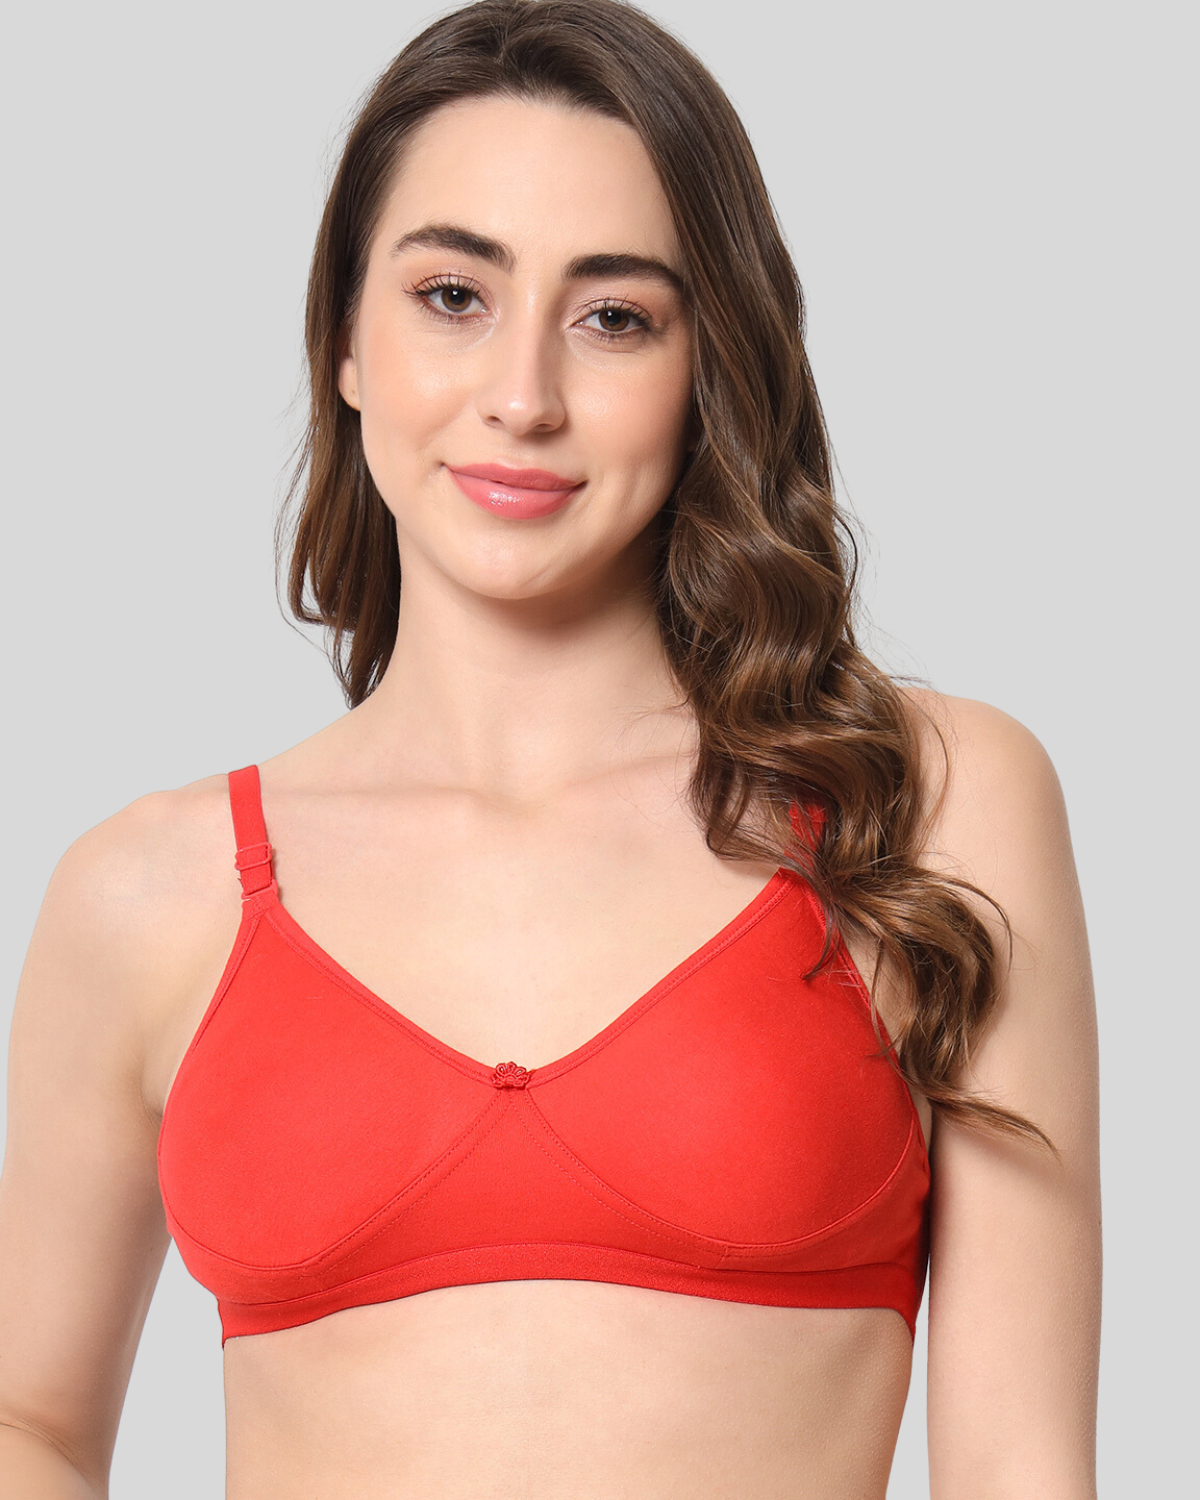 BEWILD'S BACKLESS NON PADDED BRA FOR WOMEN'S